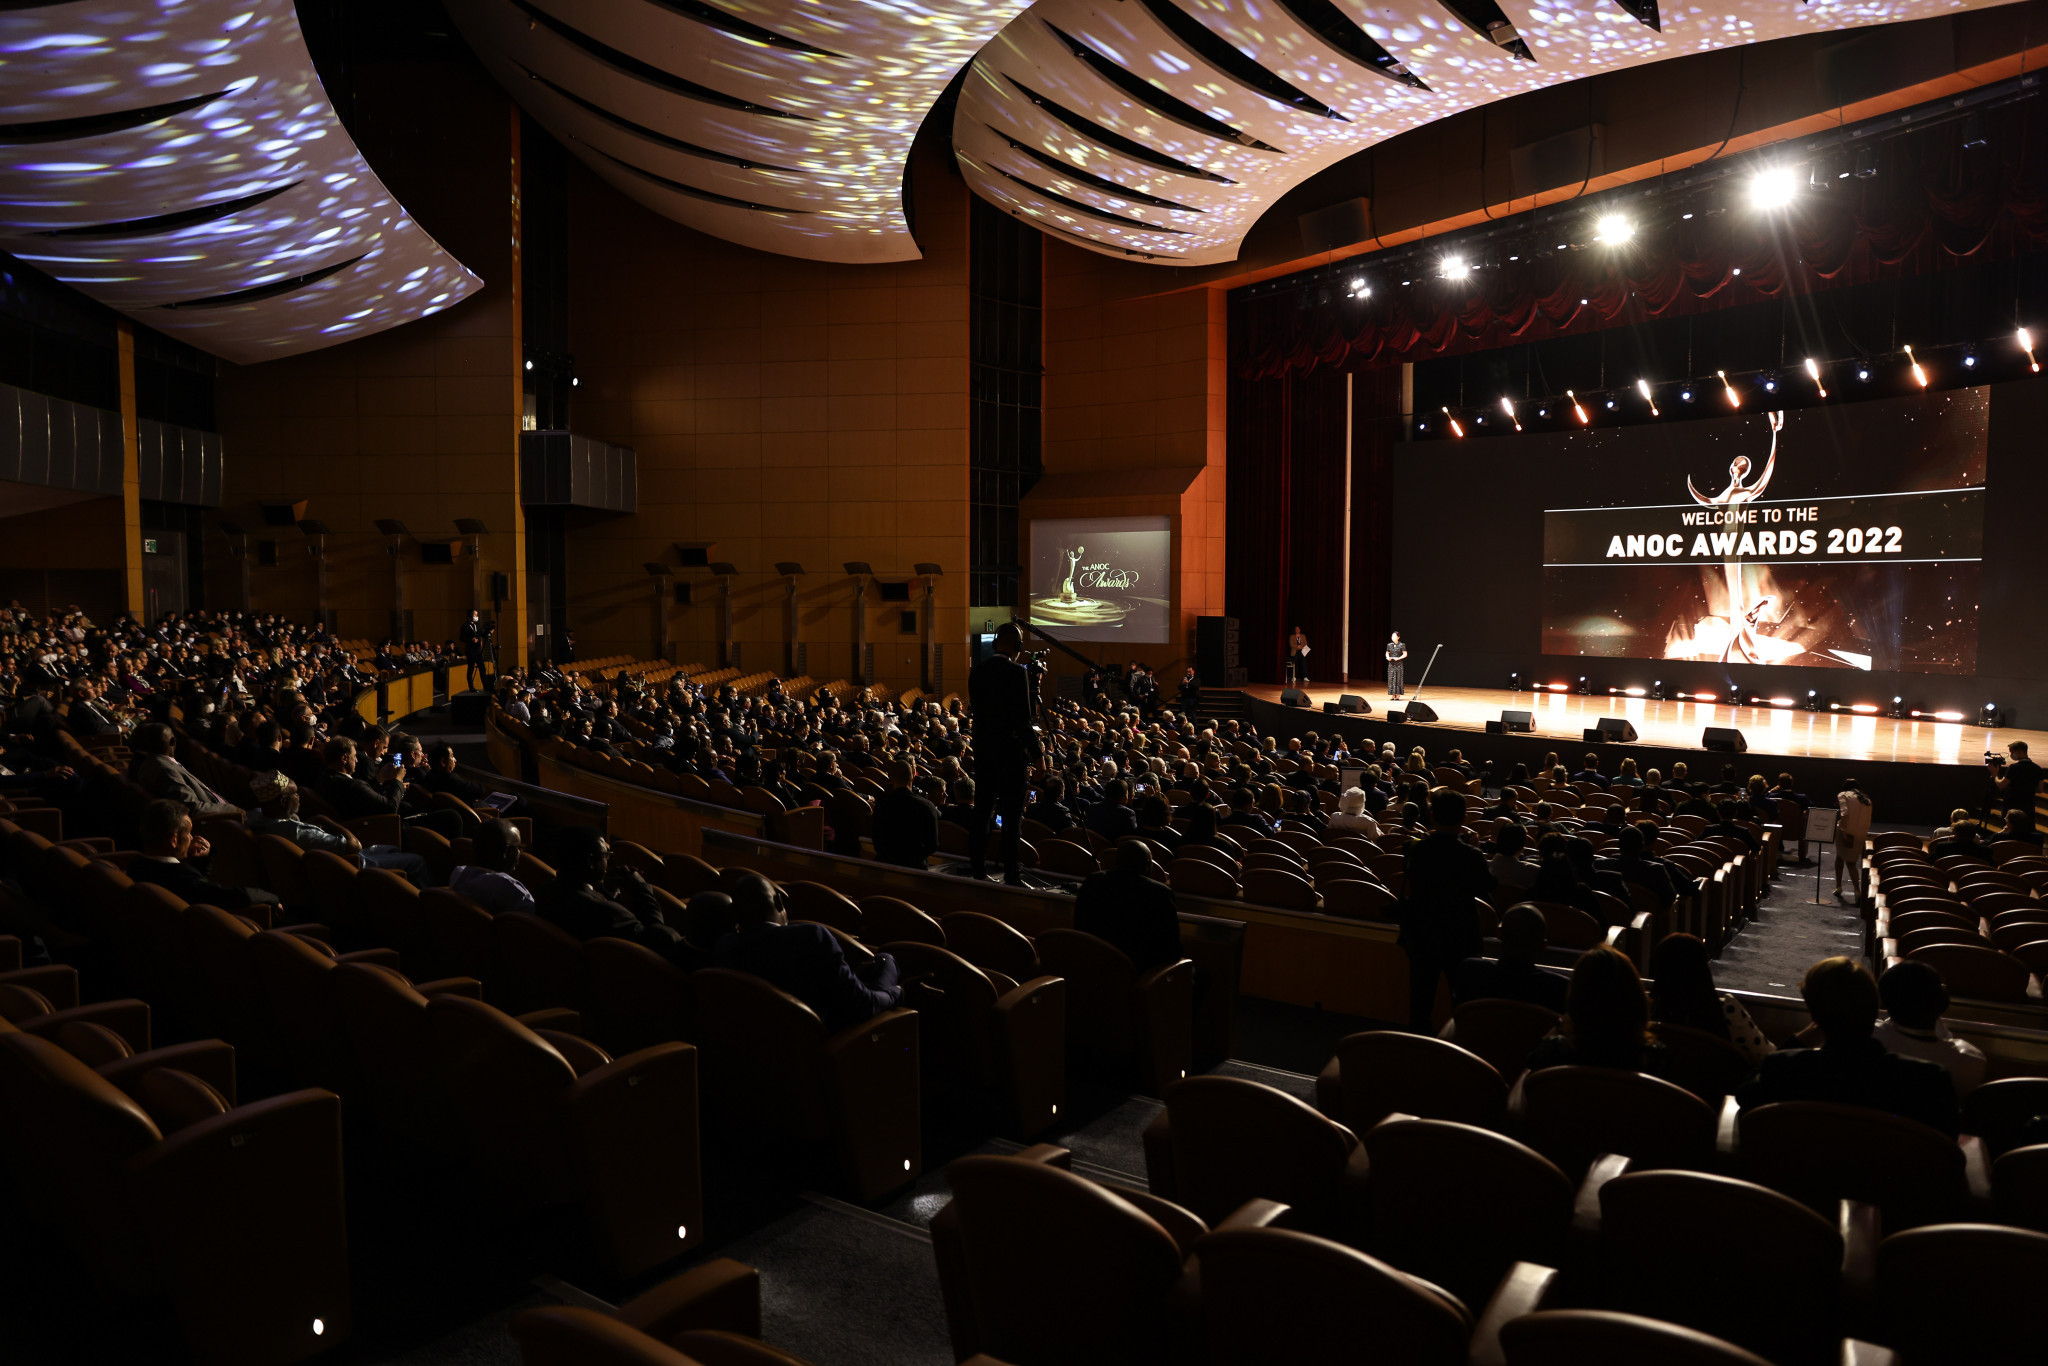 This year's ANOC Awards were staged at the COEX Convention and Exhibition Center in Seoul ©ANOC